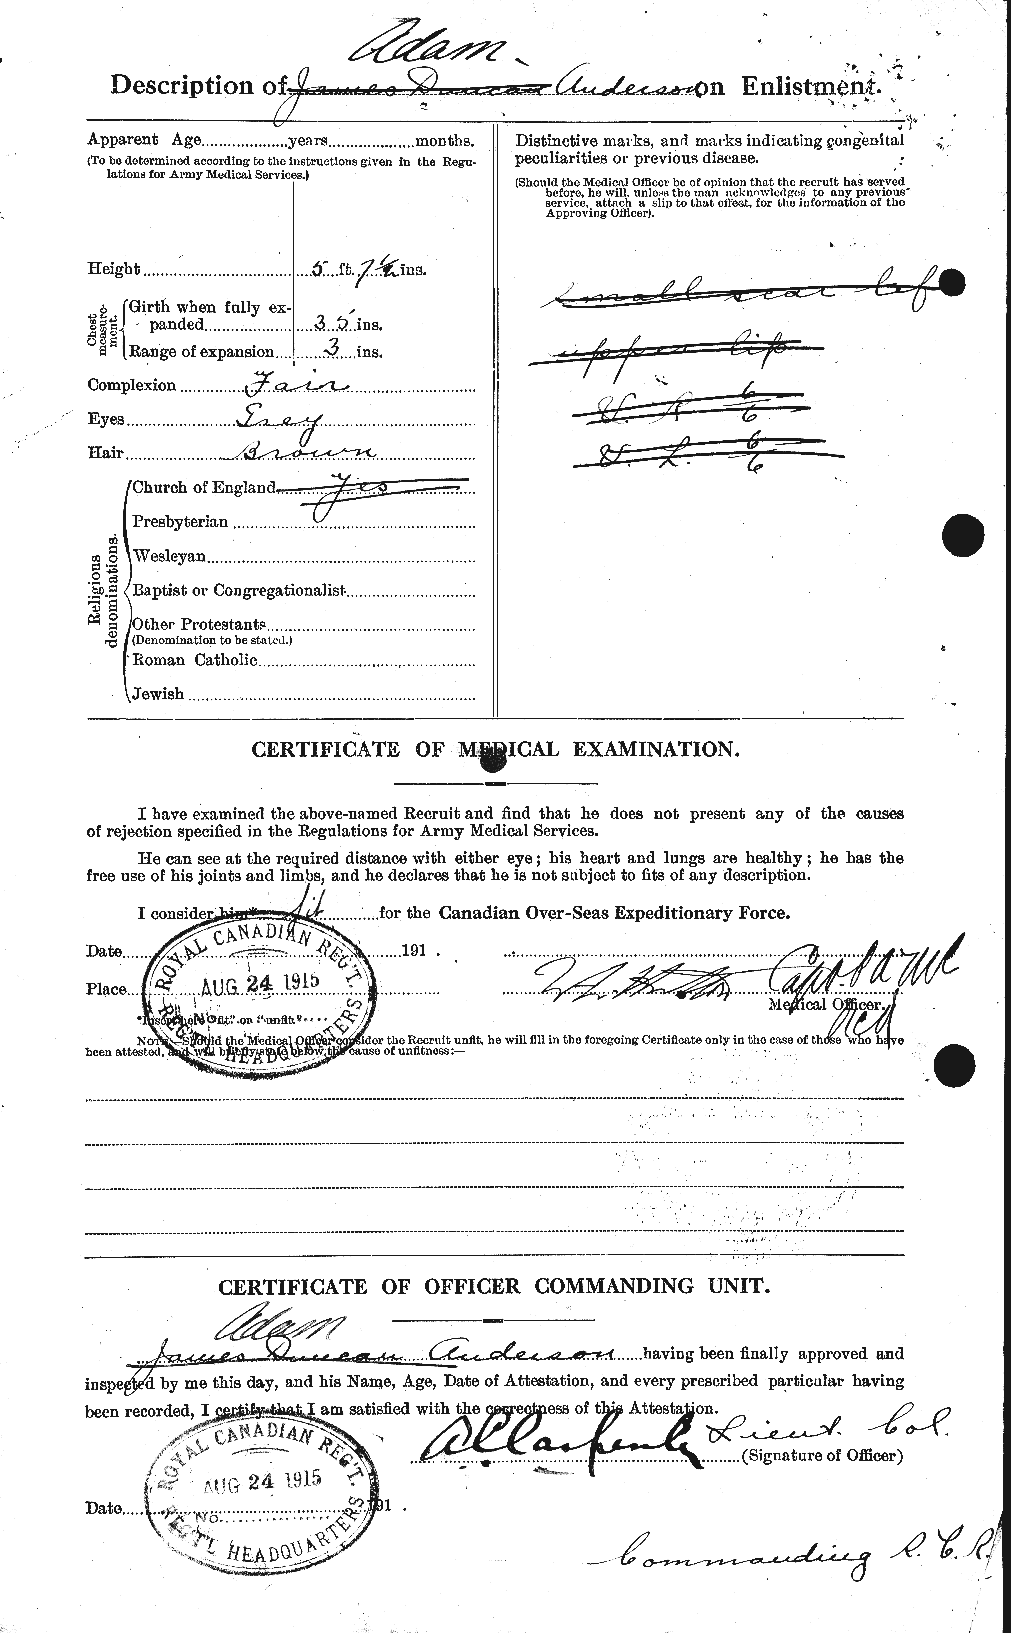 Personnel Records of the First World War - CEF 209580b